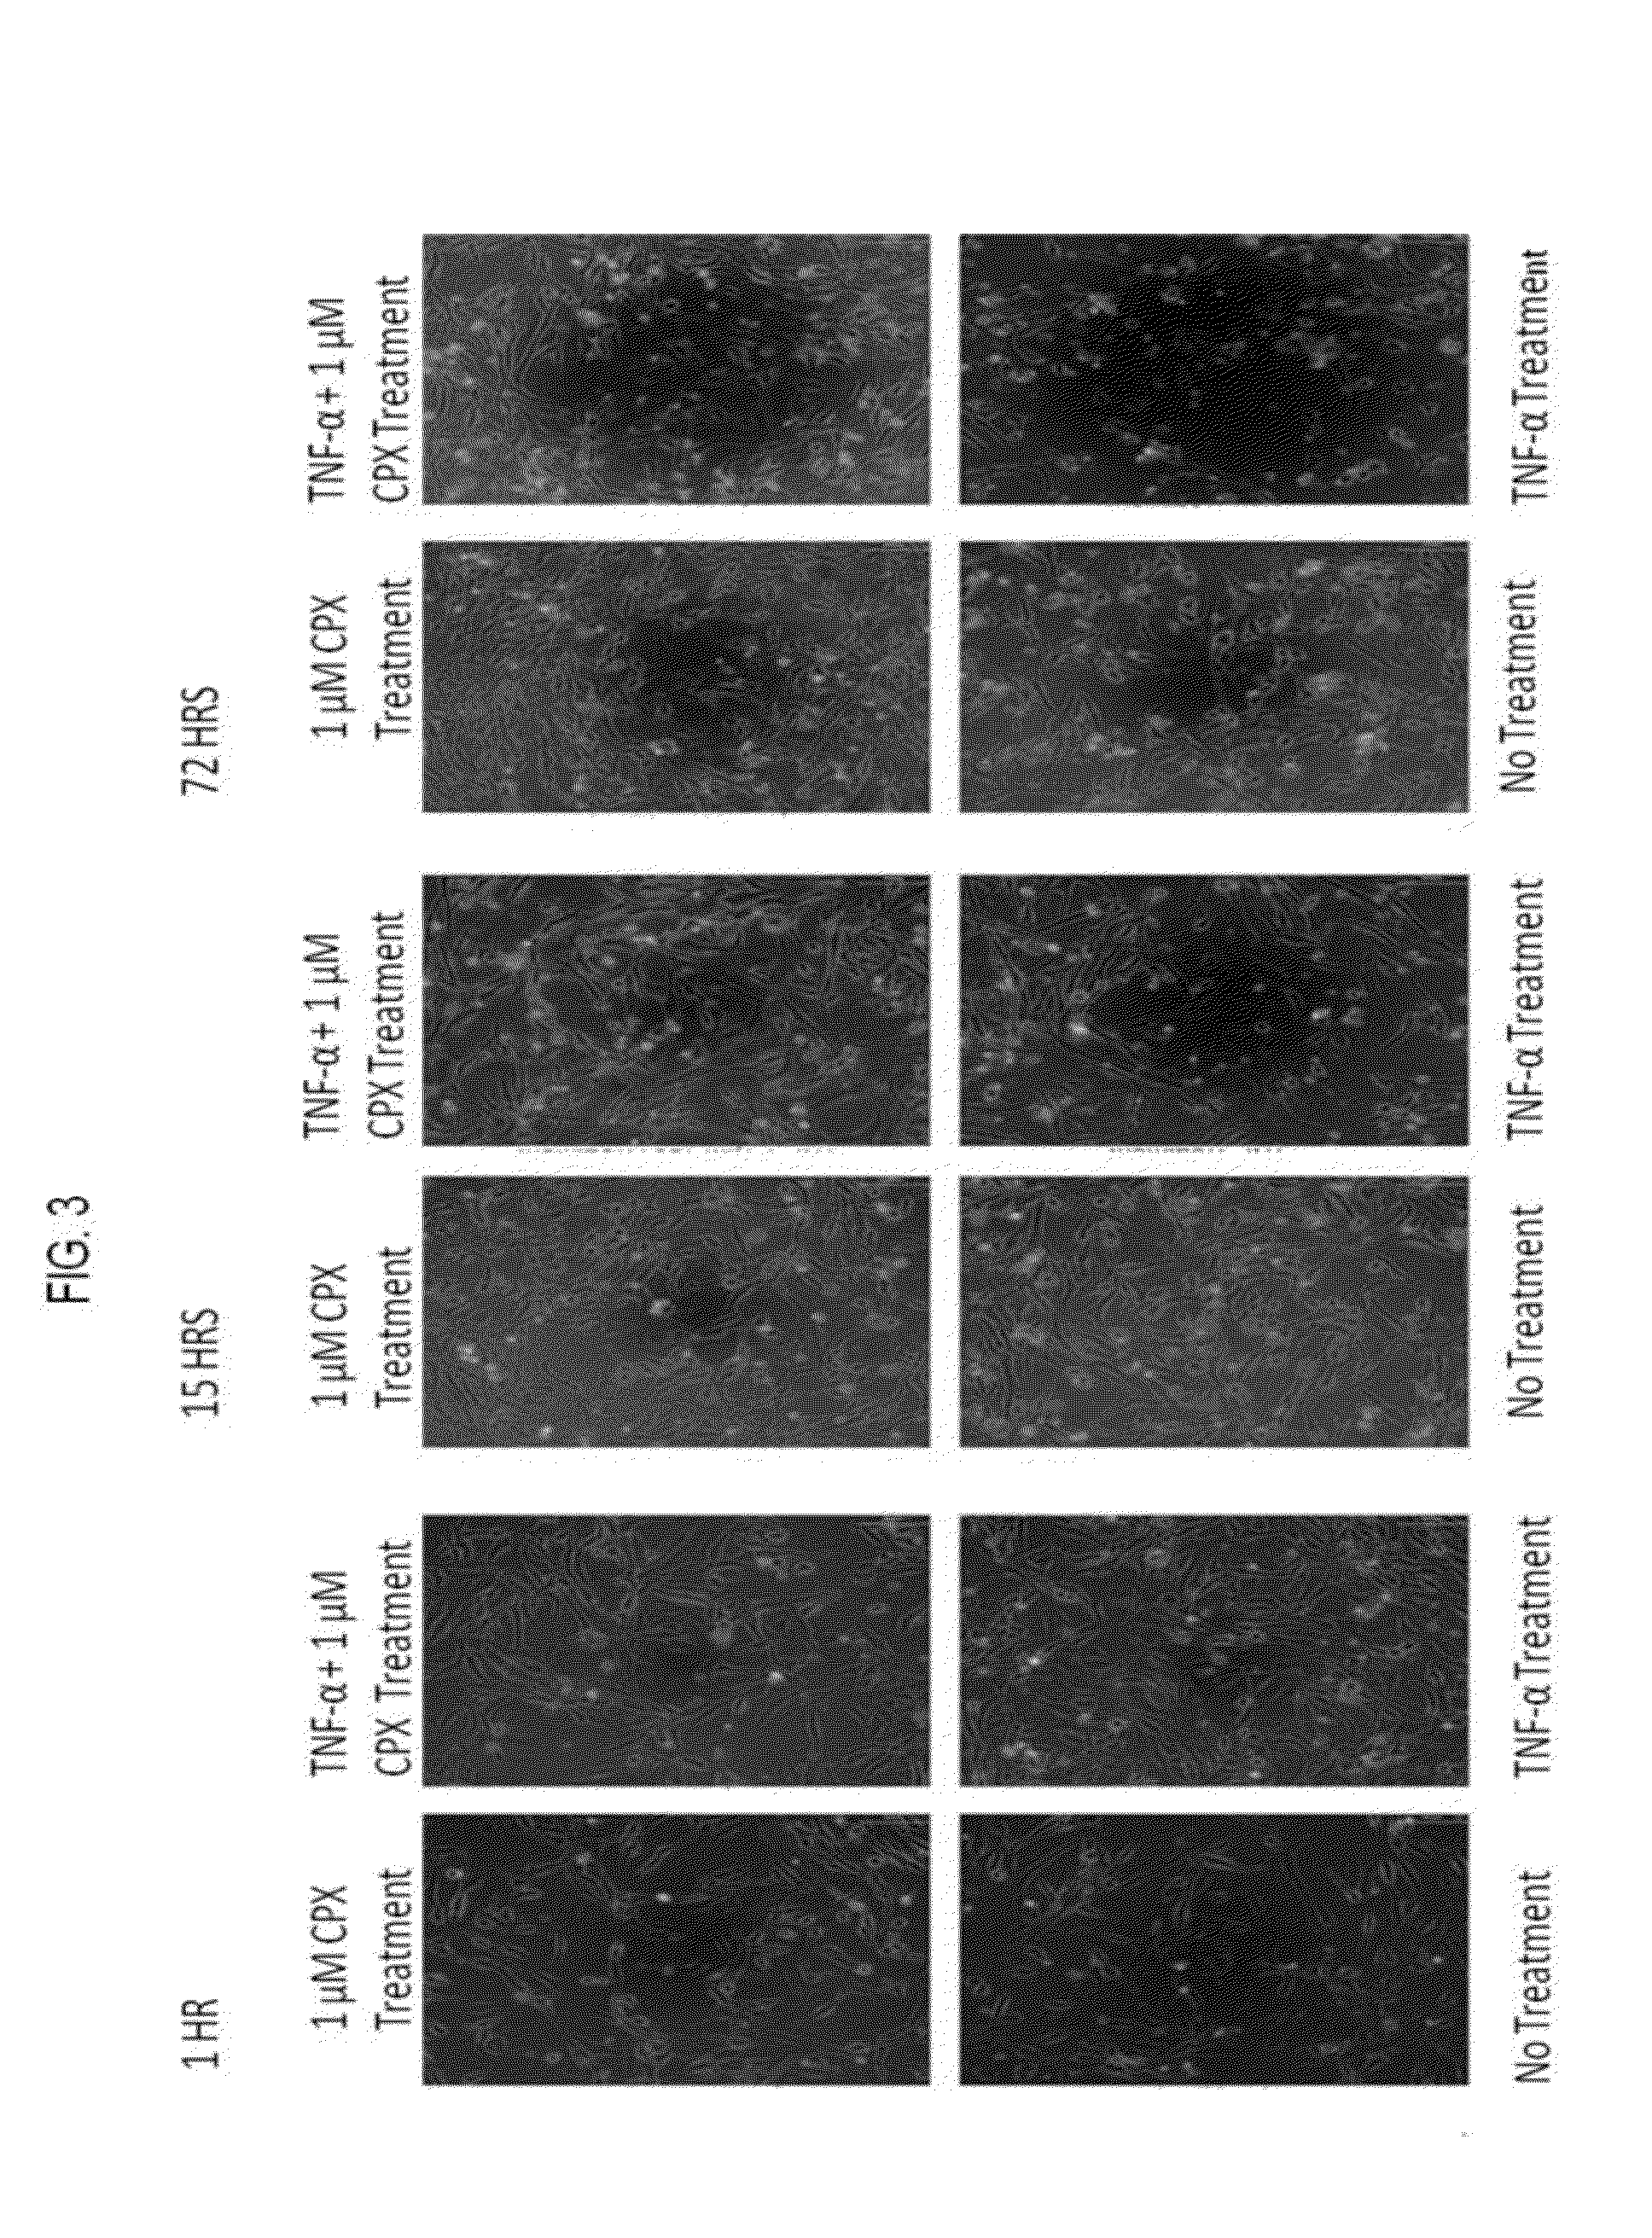 Hydroxypyridone derivatives, pharmaceutical compositions thereof, and their therapeutic use for treating inflammatory, neurodegenerative, or immune-mediated diseases